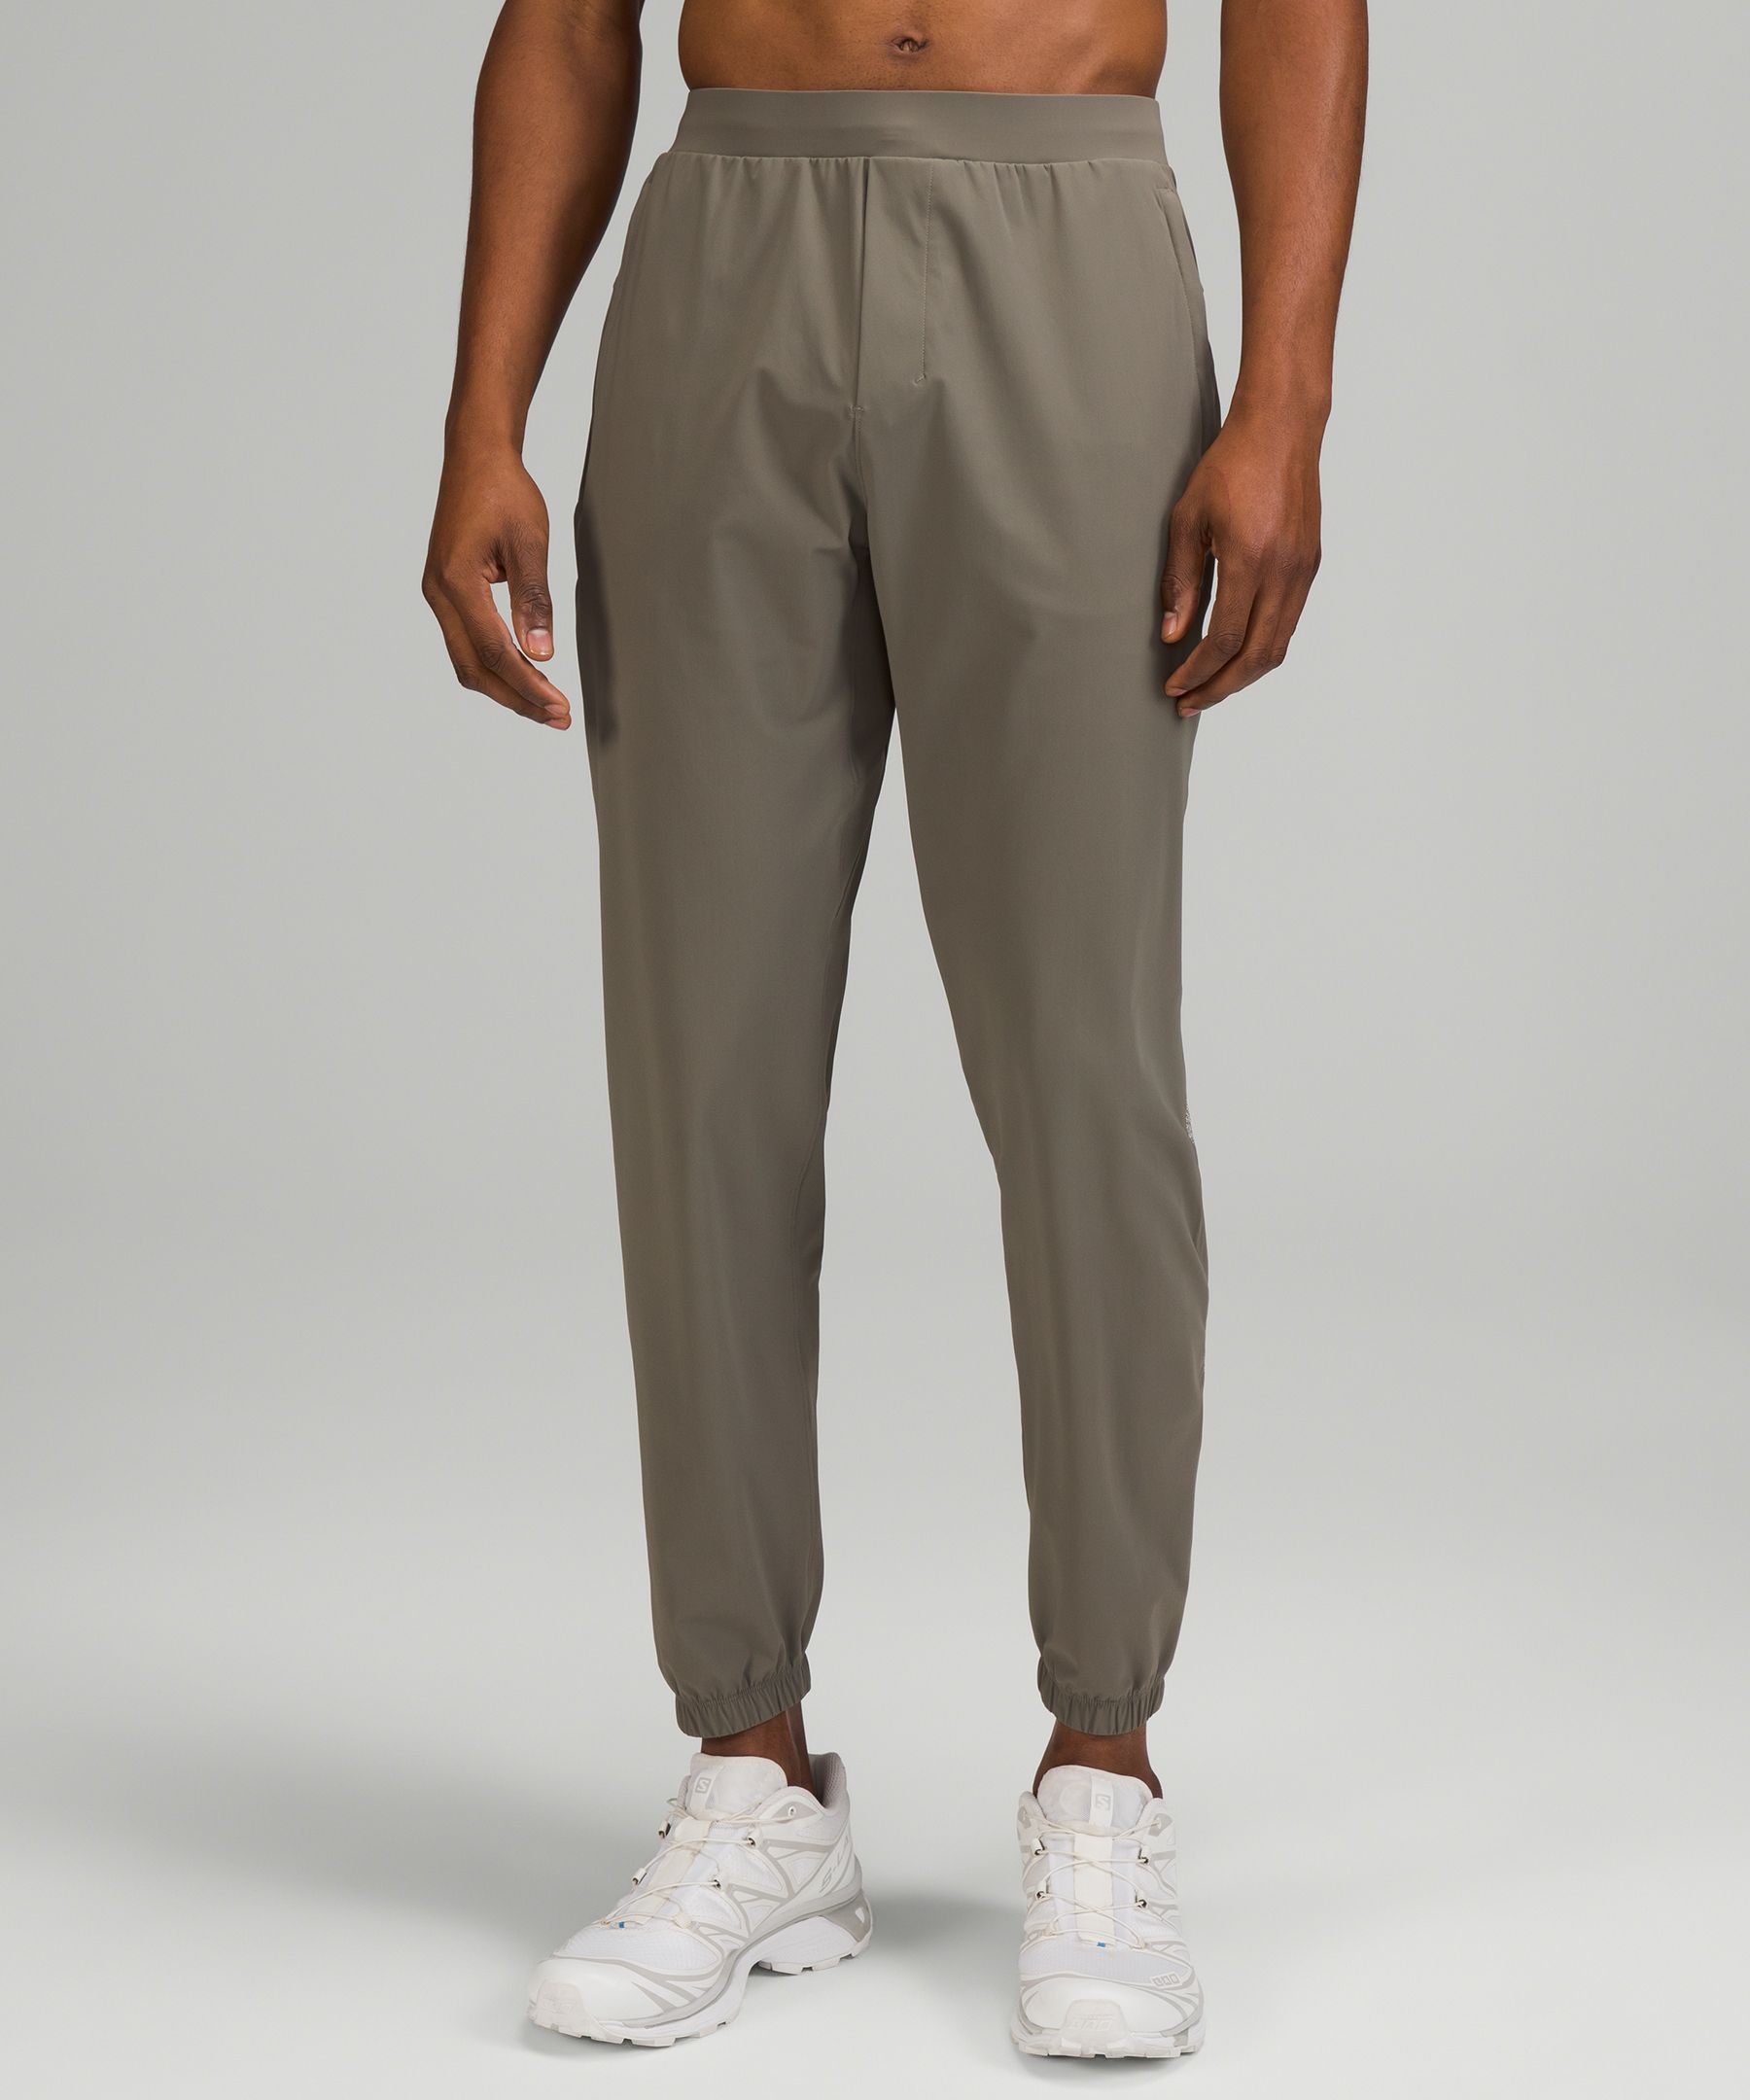 Lululemon Surge Joggers In Rover